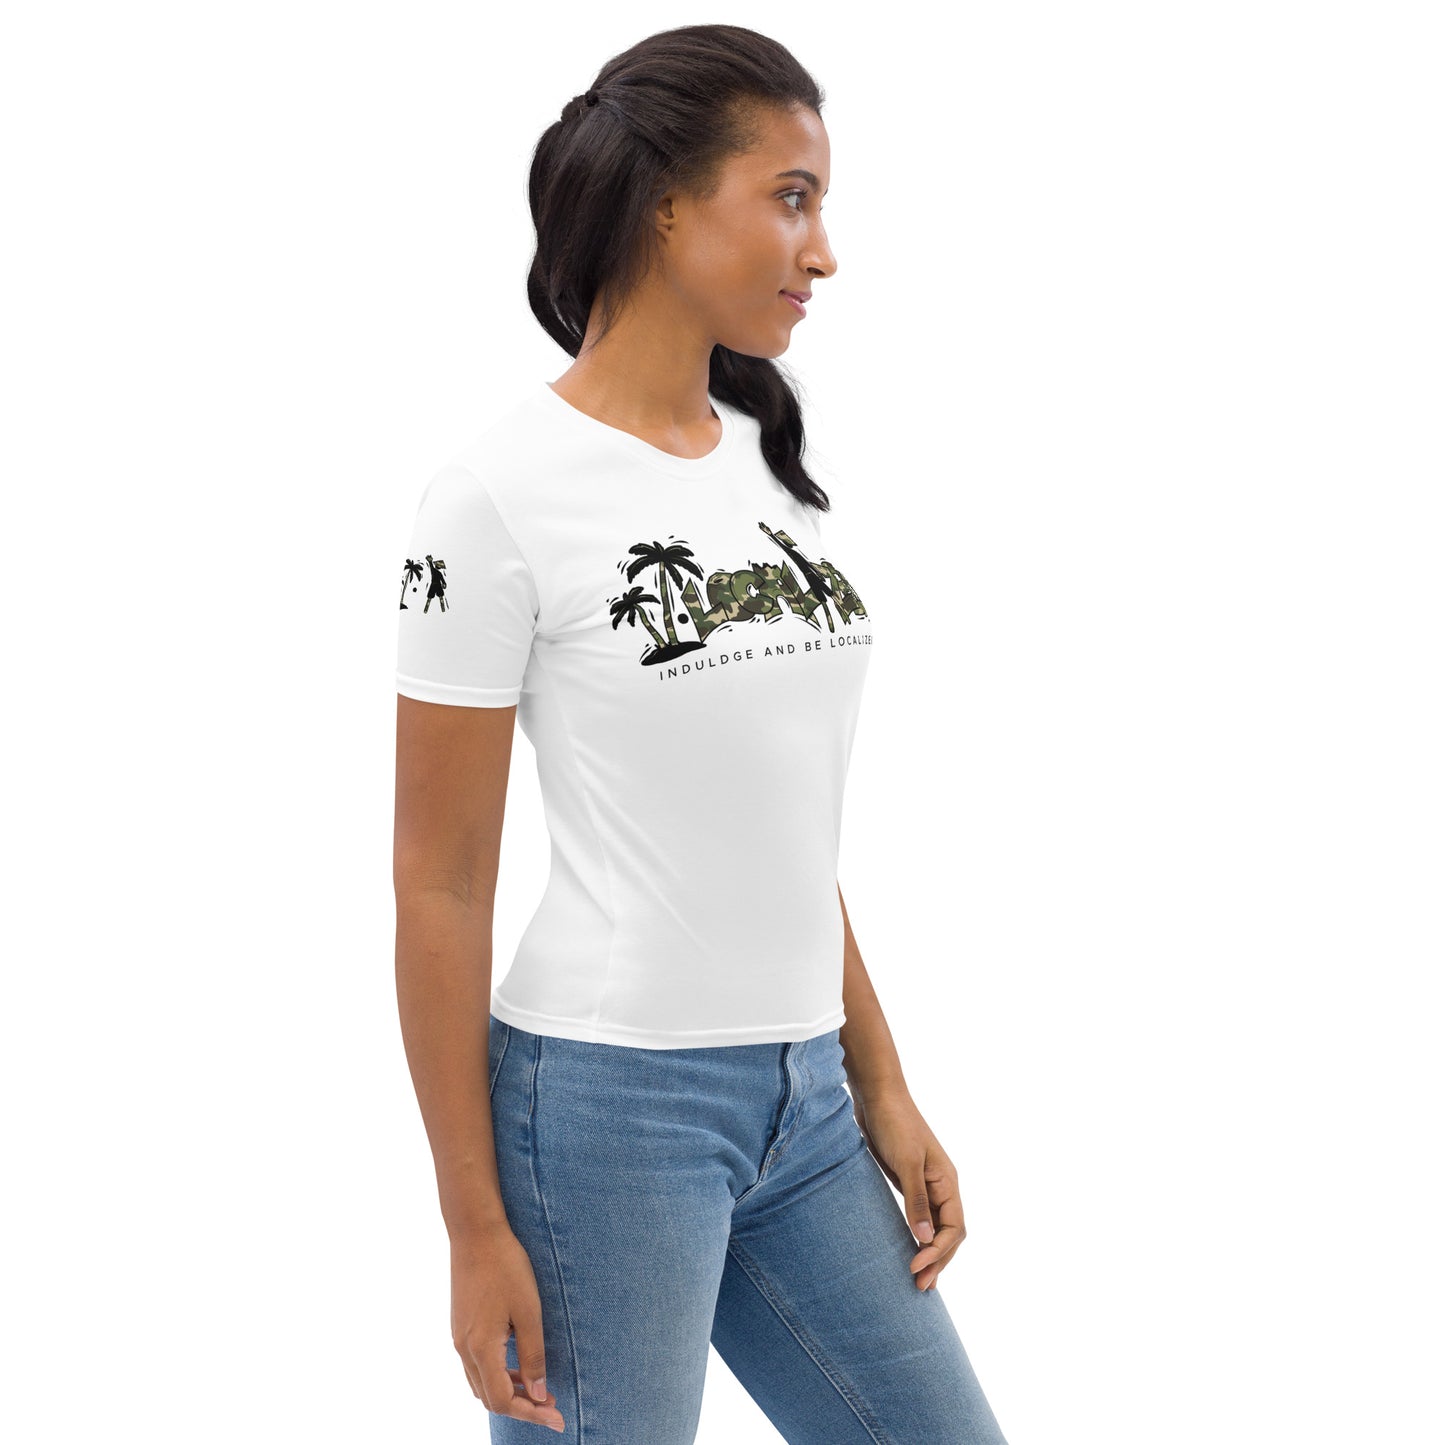 White V.Localized (Camo) Women’s Dry-Fit T-Shirt